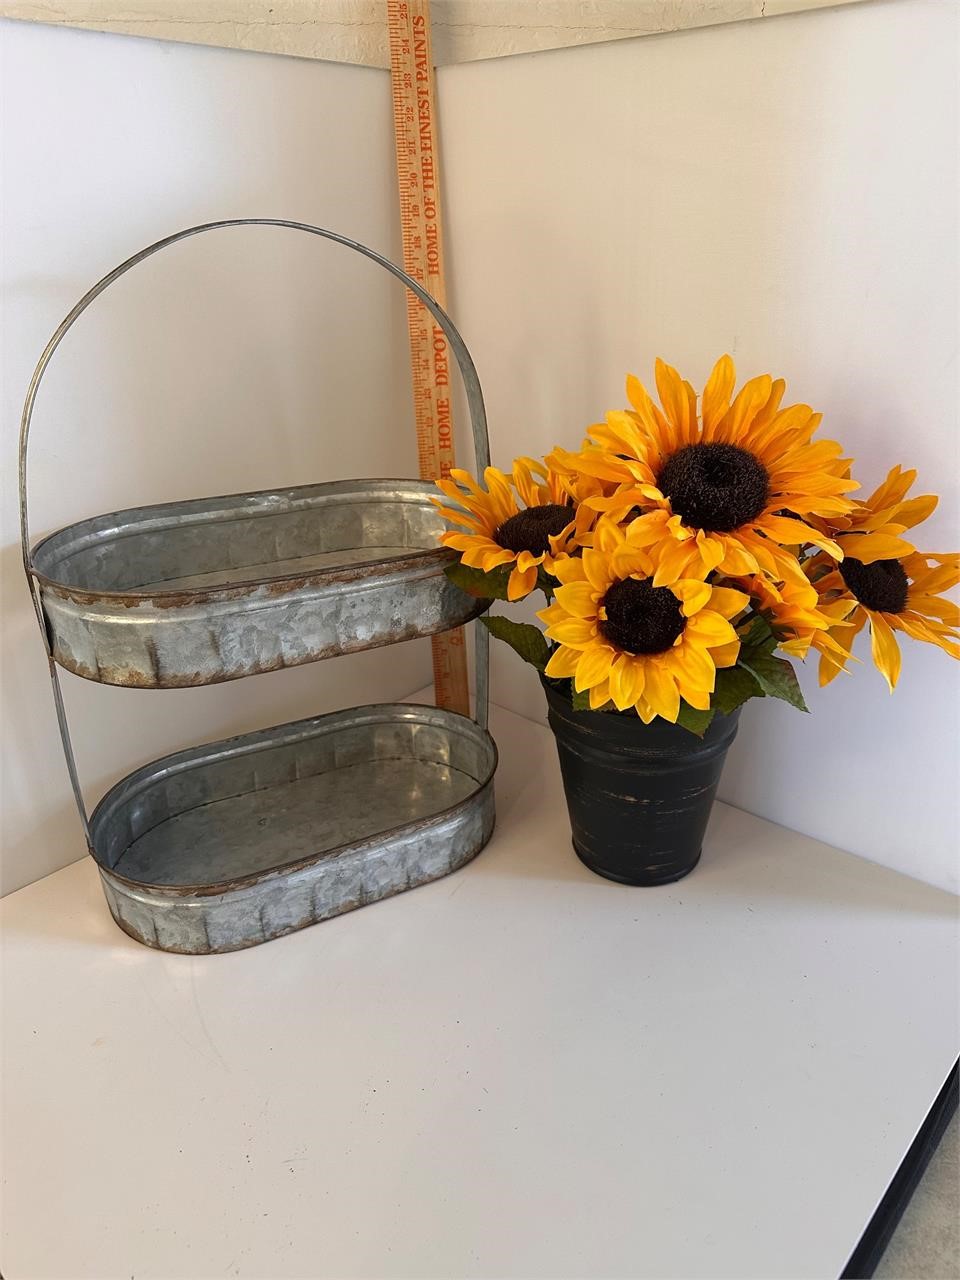 2-Tier metal decor tray and sunflower decor